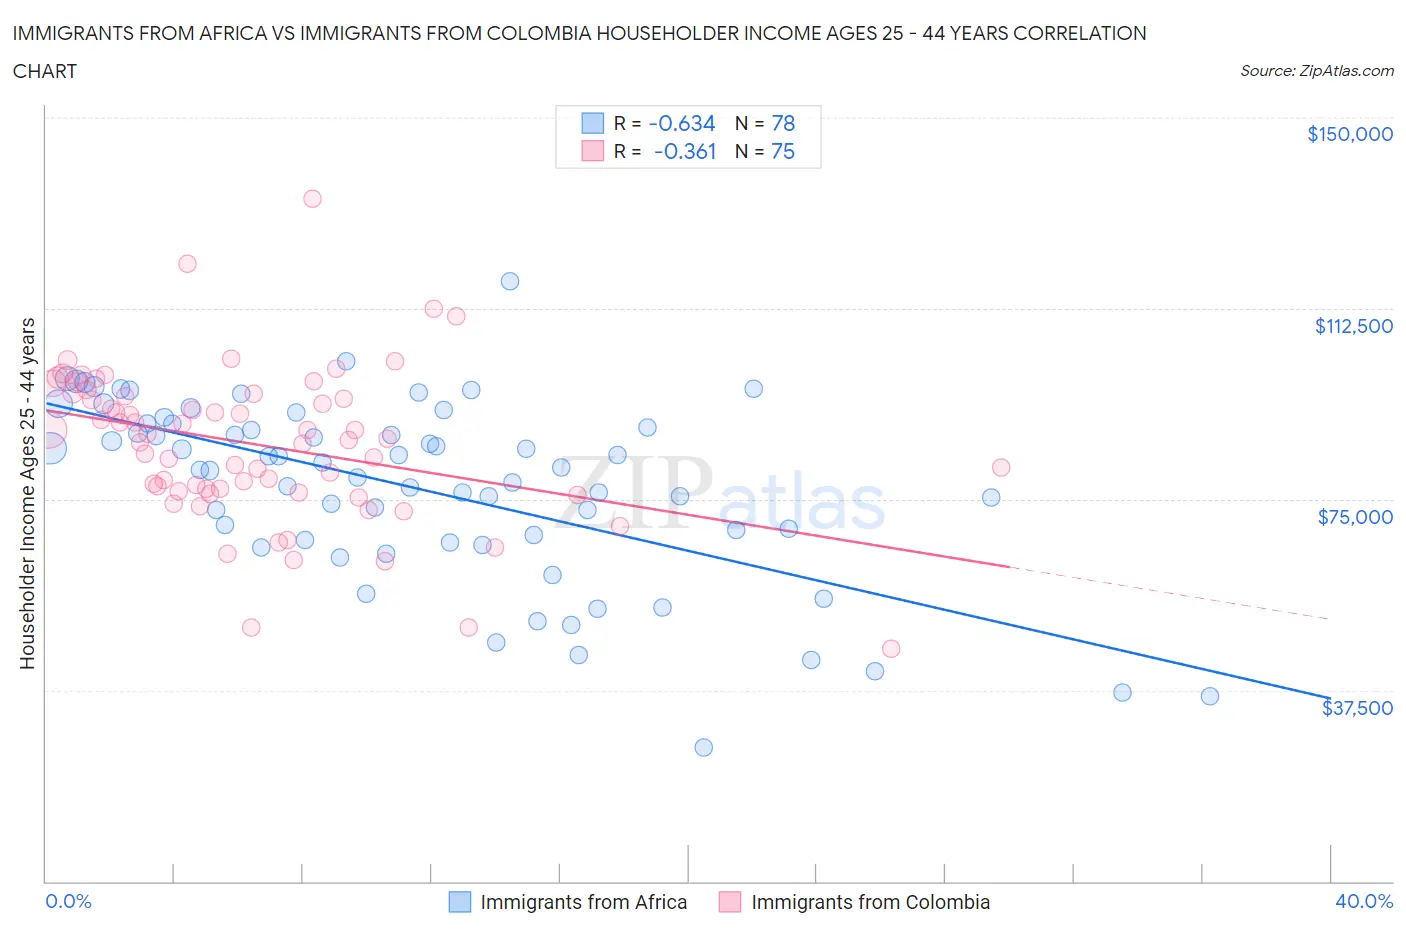 Immigrants from Africa vs Immigrants from Colombia Householder Income Ages 25 - 44 years